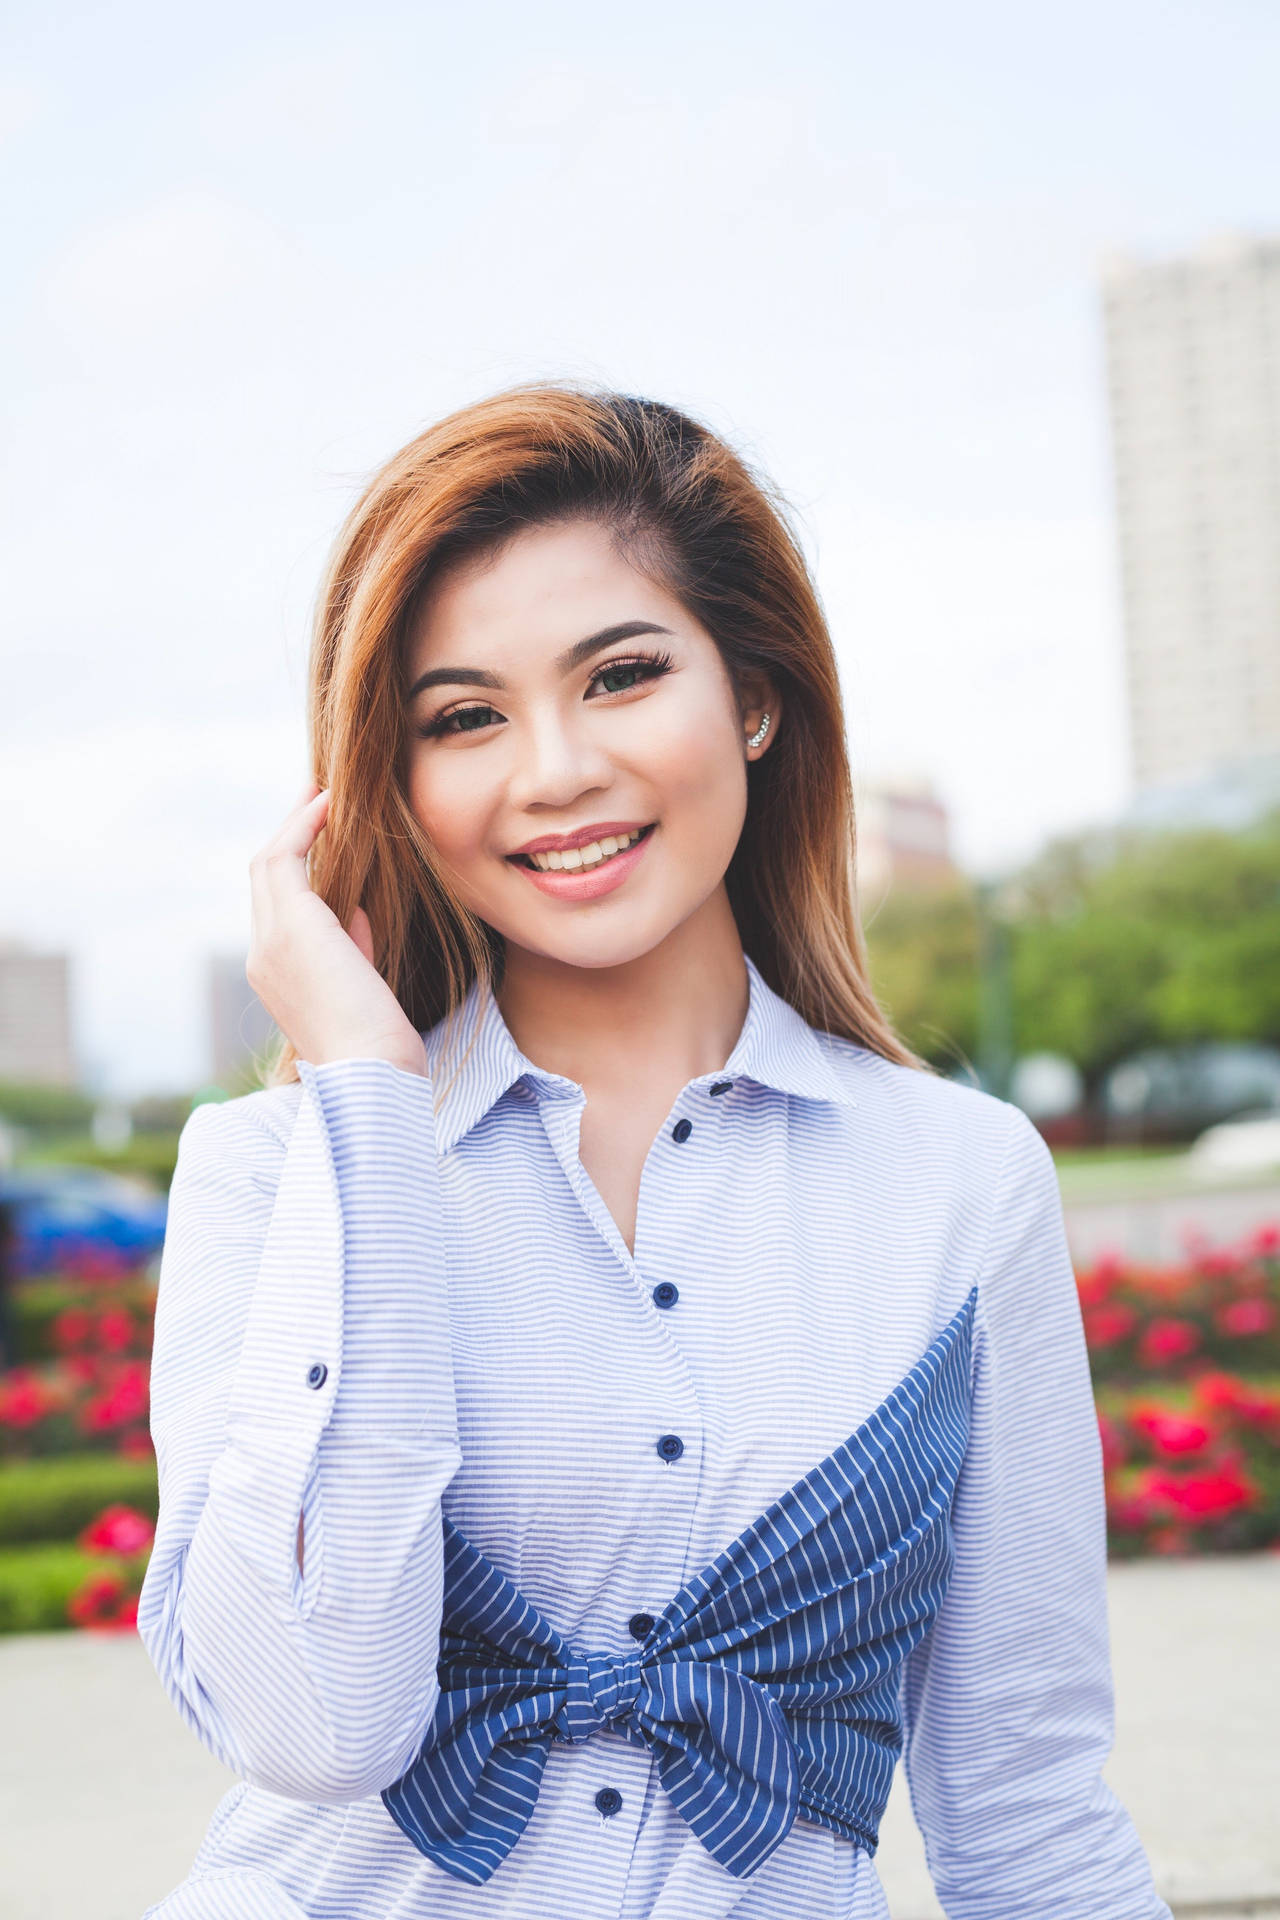 Asian Woman With A Stunning Smile